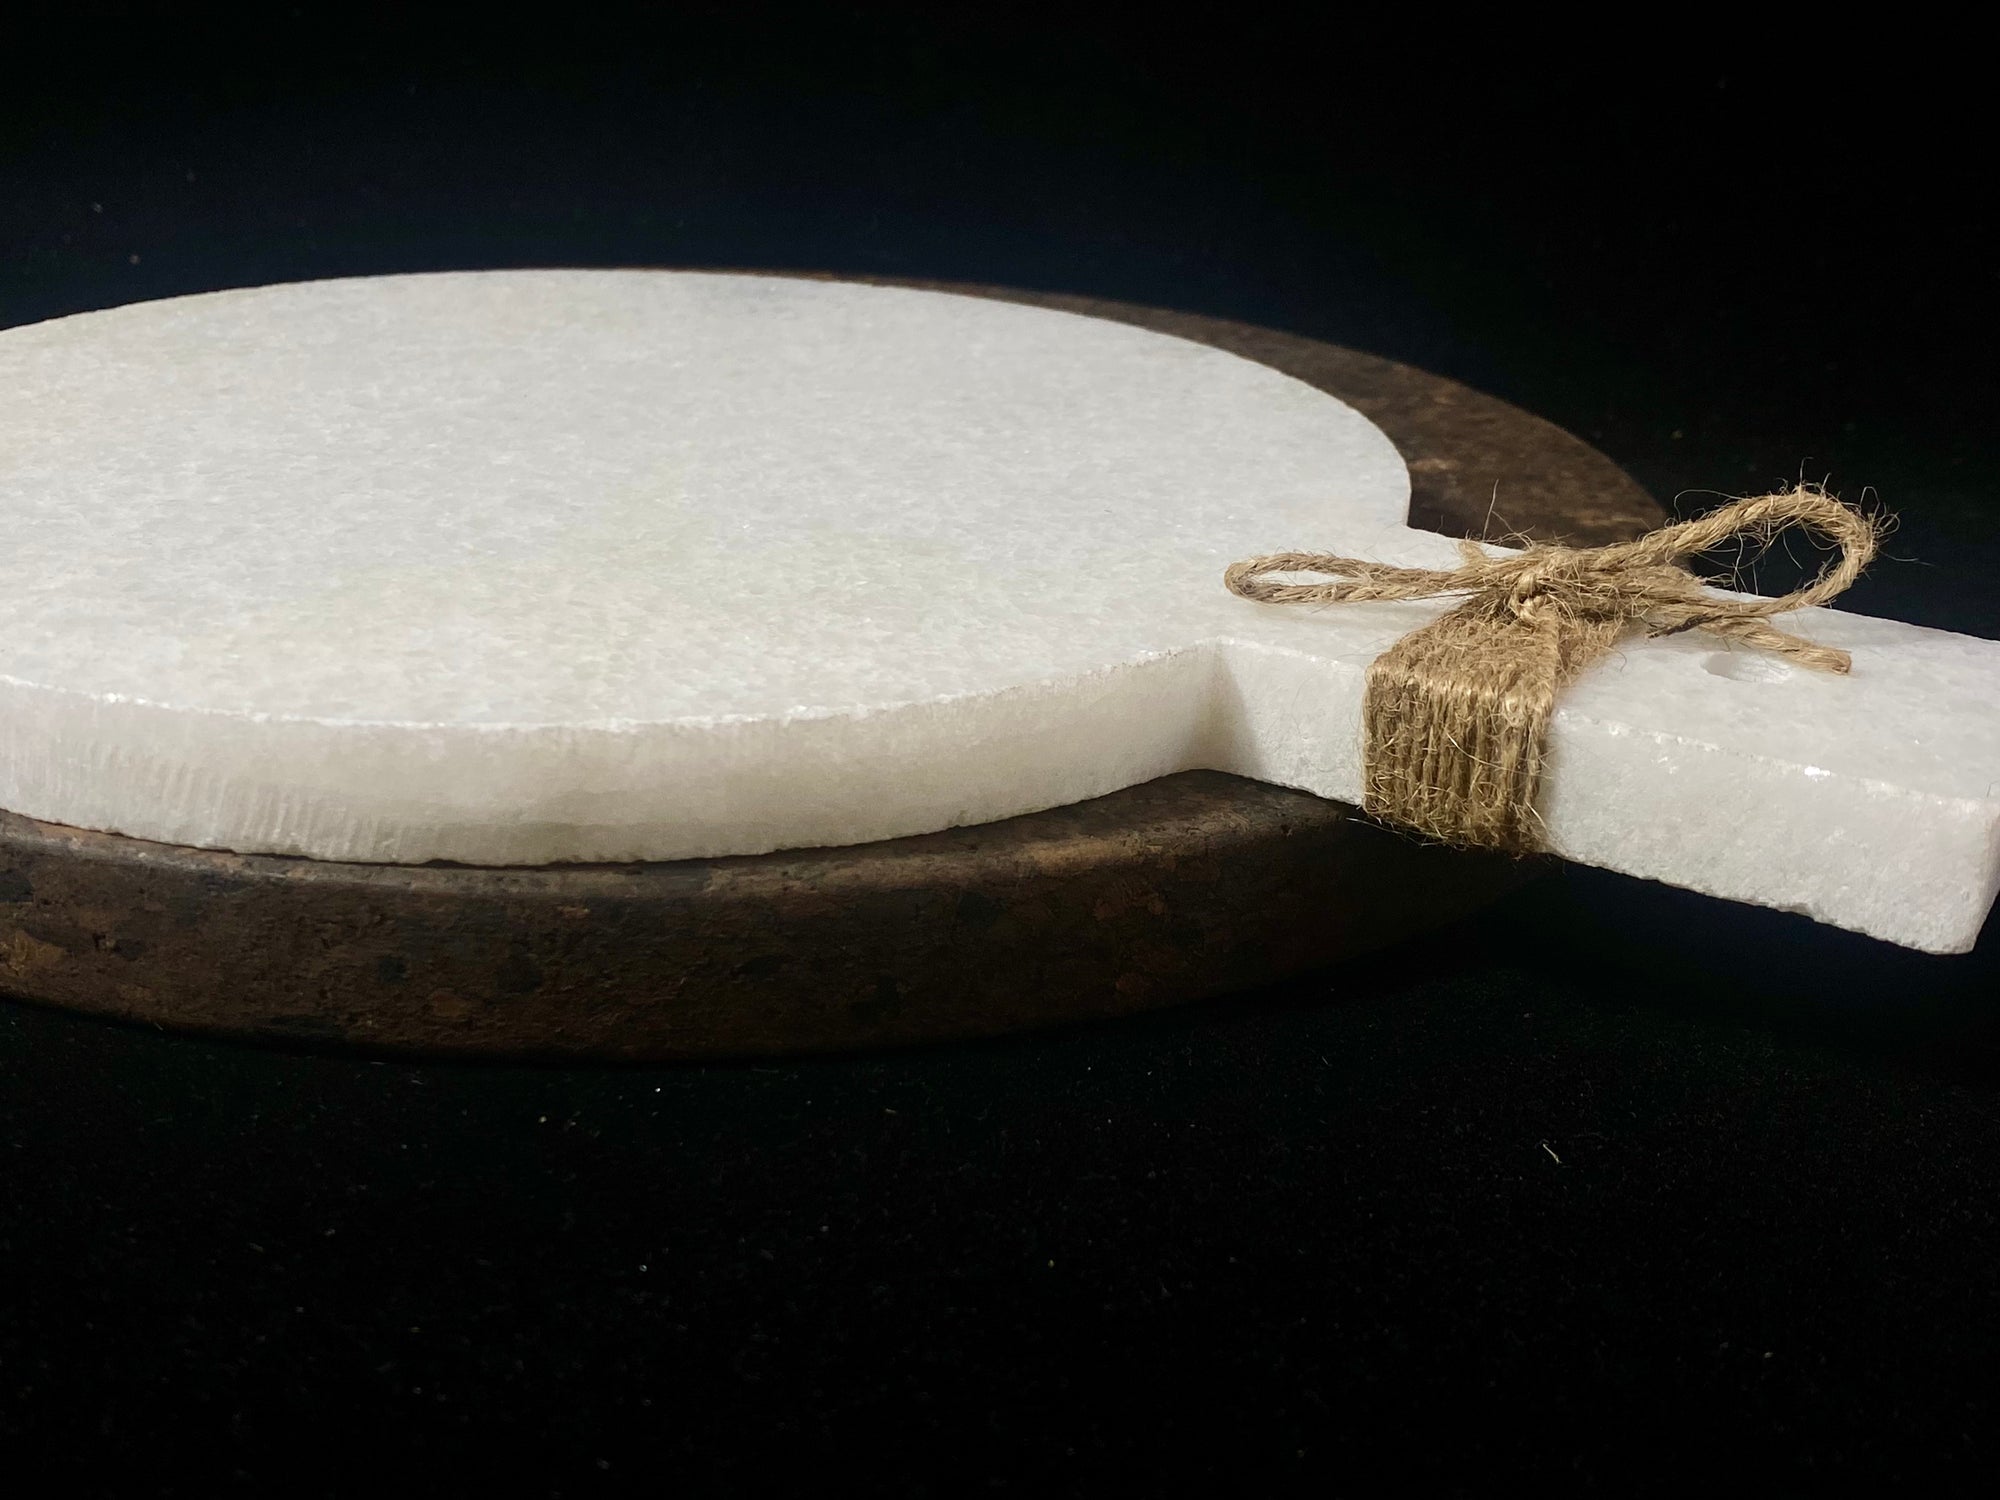 Our simple marble plate is designed for serving nibbles or for use as a cheeseboard. However, its simplicity means that it would also make a very nice plant or object stand. Hand carved in Rajasthan from white marble. A simple handle with hole for hanging completes the look. Measurements: length 29 cm, 21.5 cm disk diameter